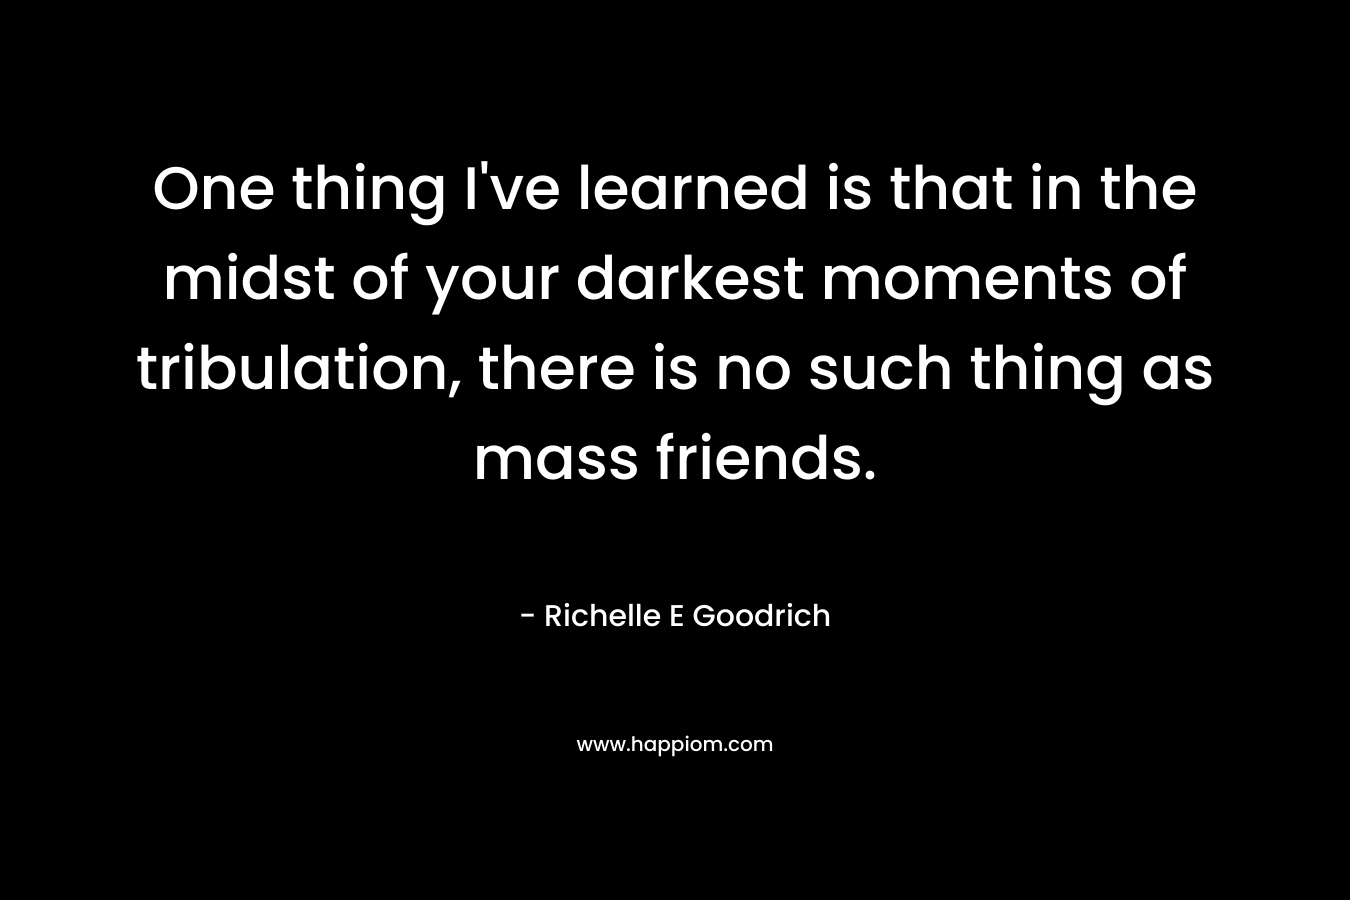 One thing I've learned is that in the midst of your darkest moments of tribulation, there is no such thing as mass friends.